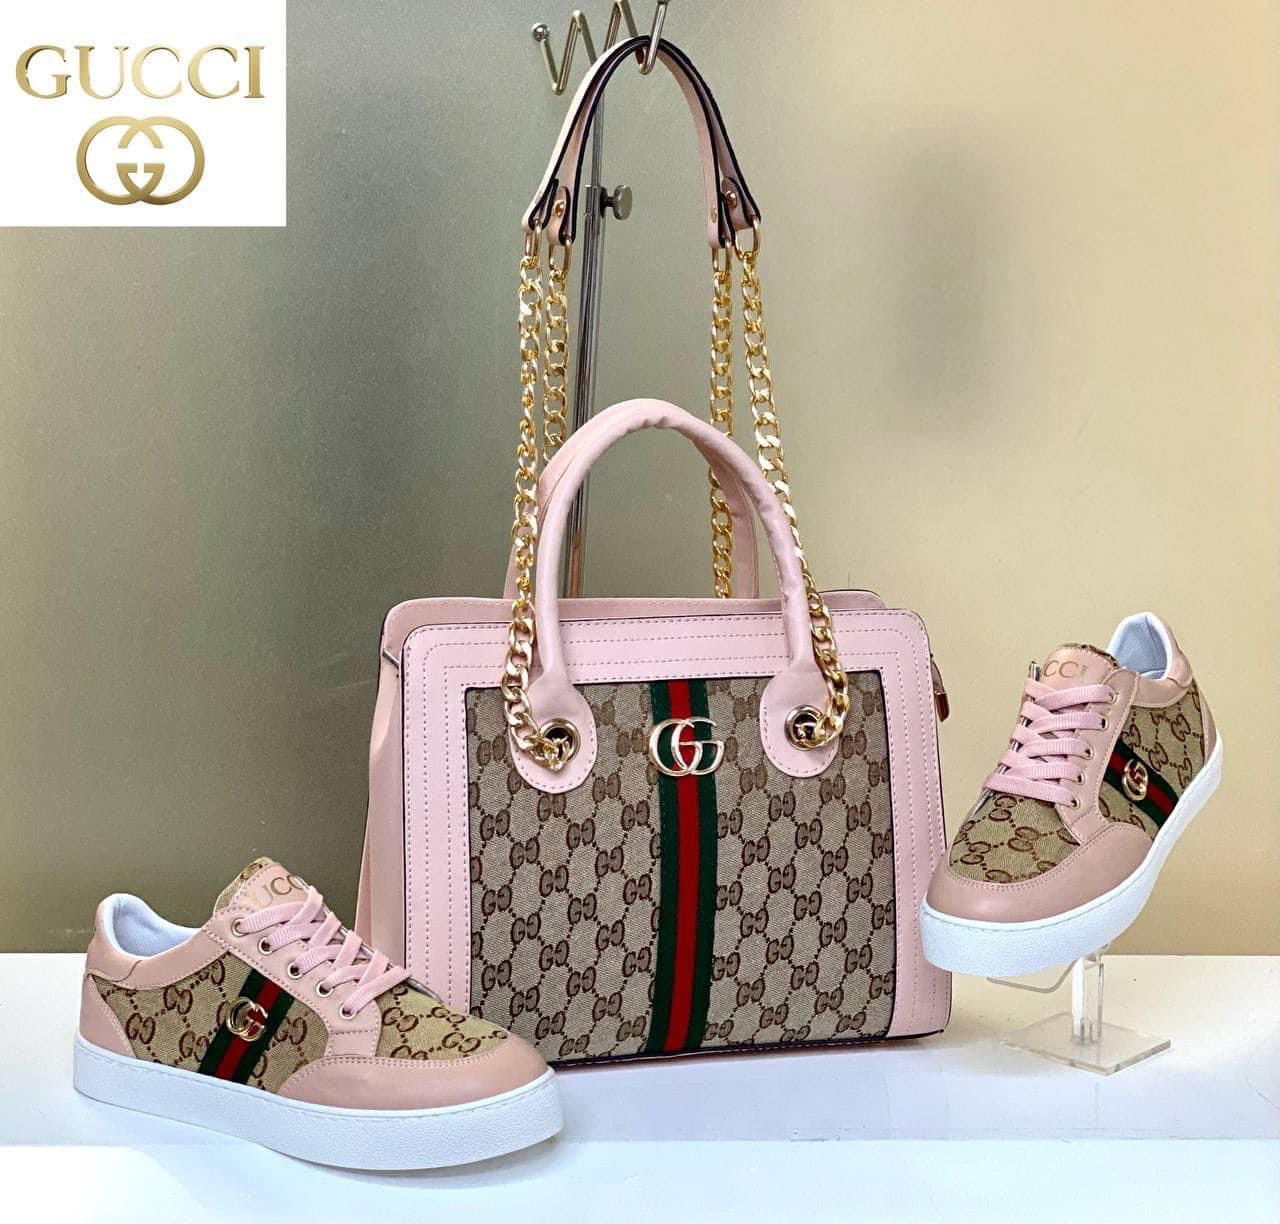 Gucci Tote Bags Set Of Two Pcs | My Style Hub